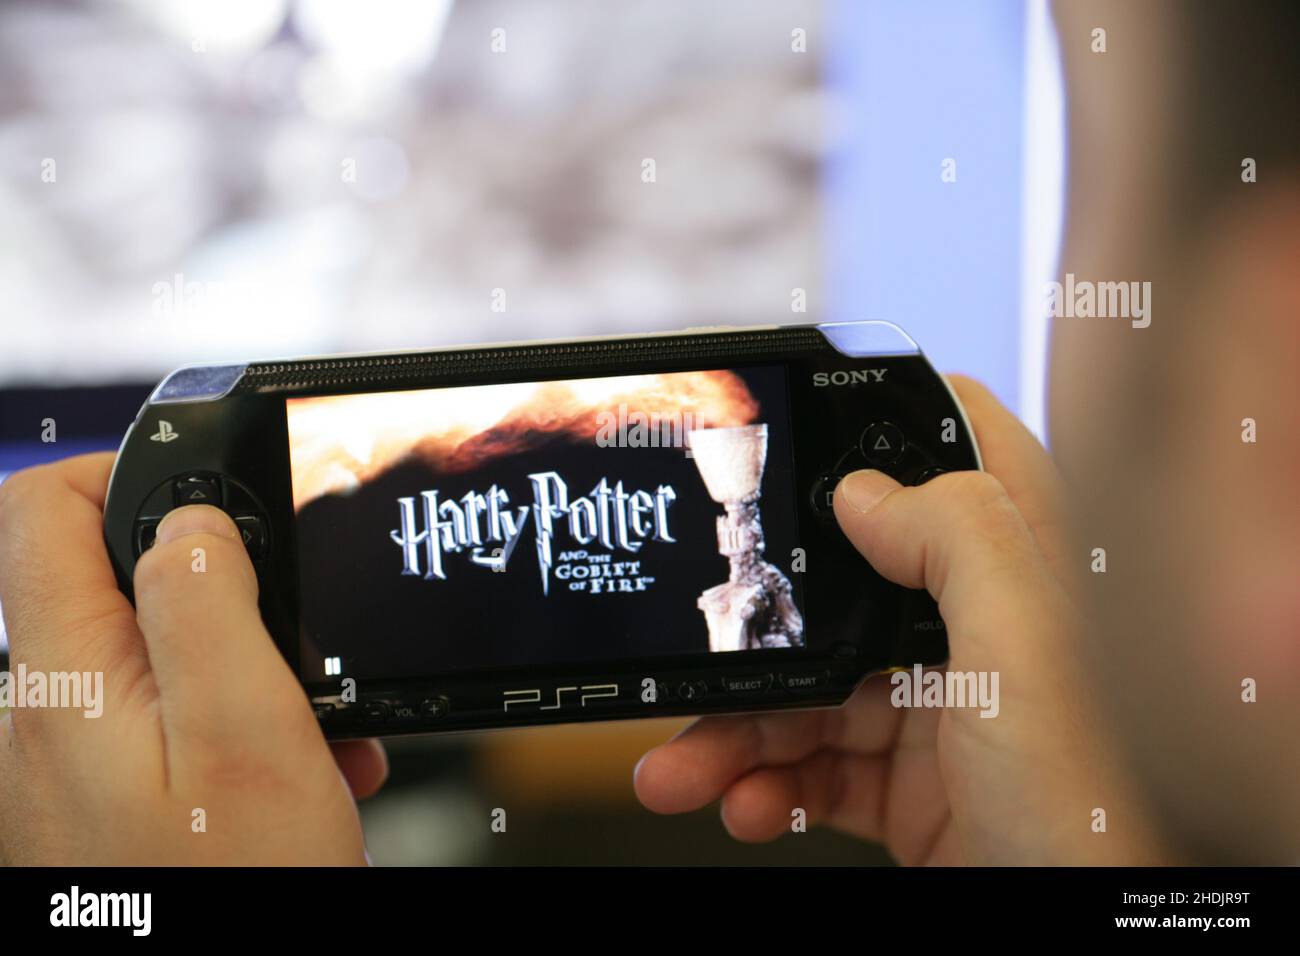 Psp Games High Resolution Stock Photography and Images - Alamy